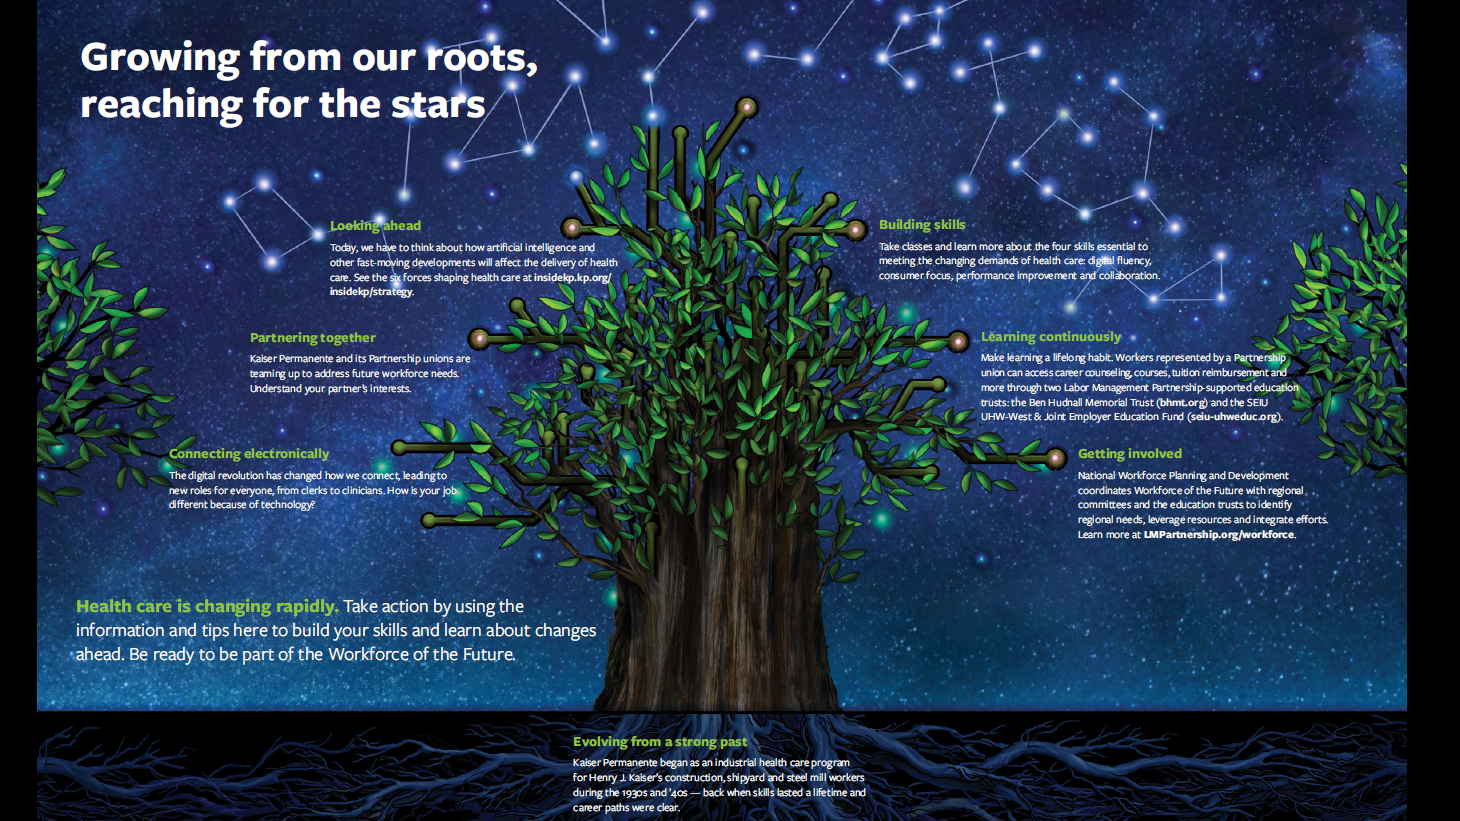 Infographic featuring image of a tree